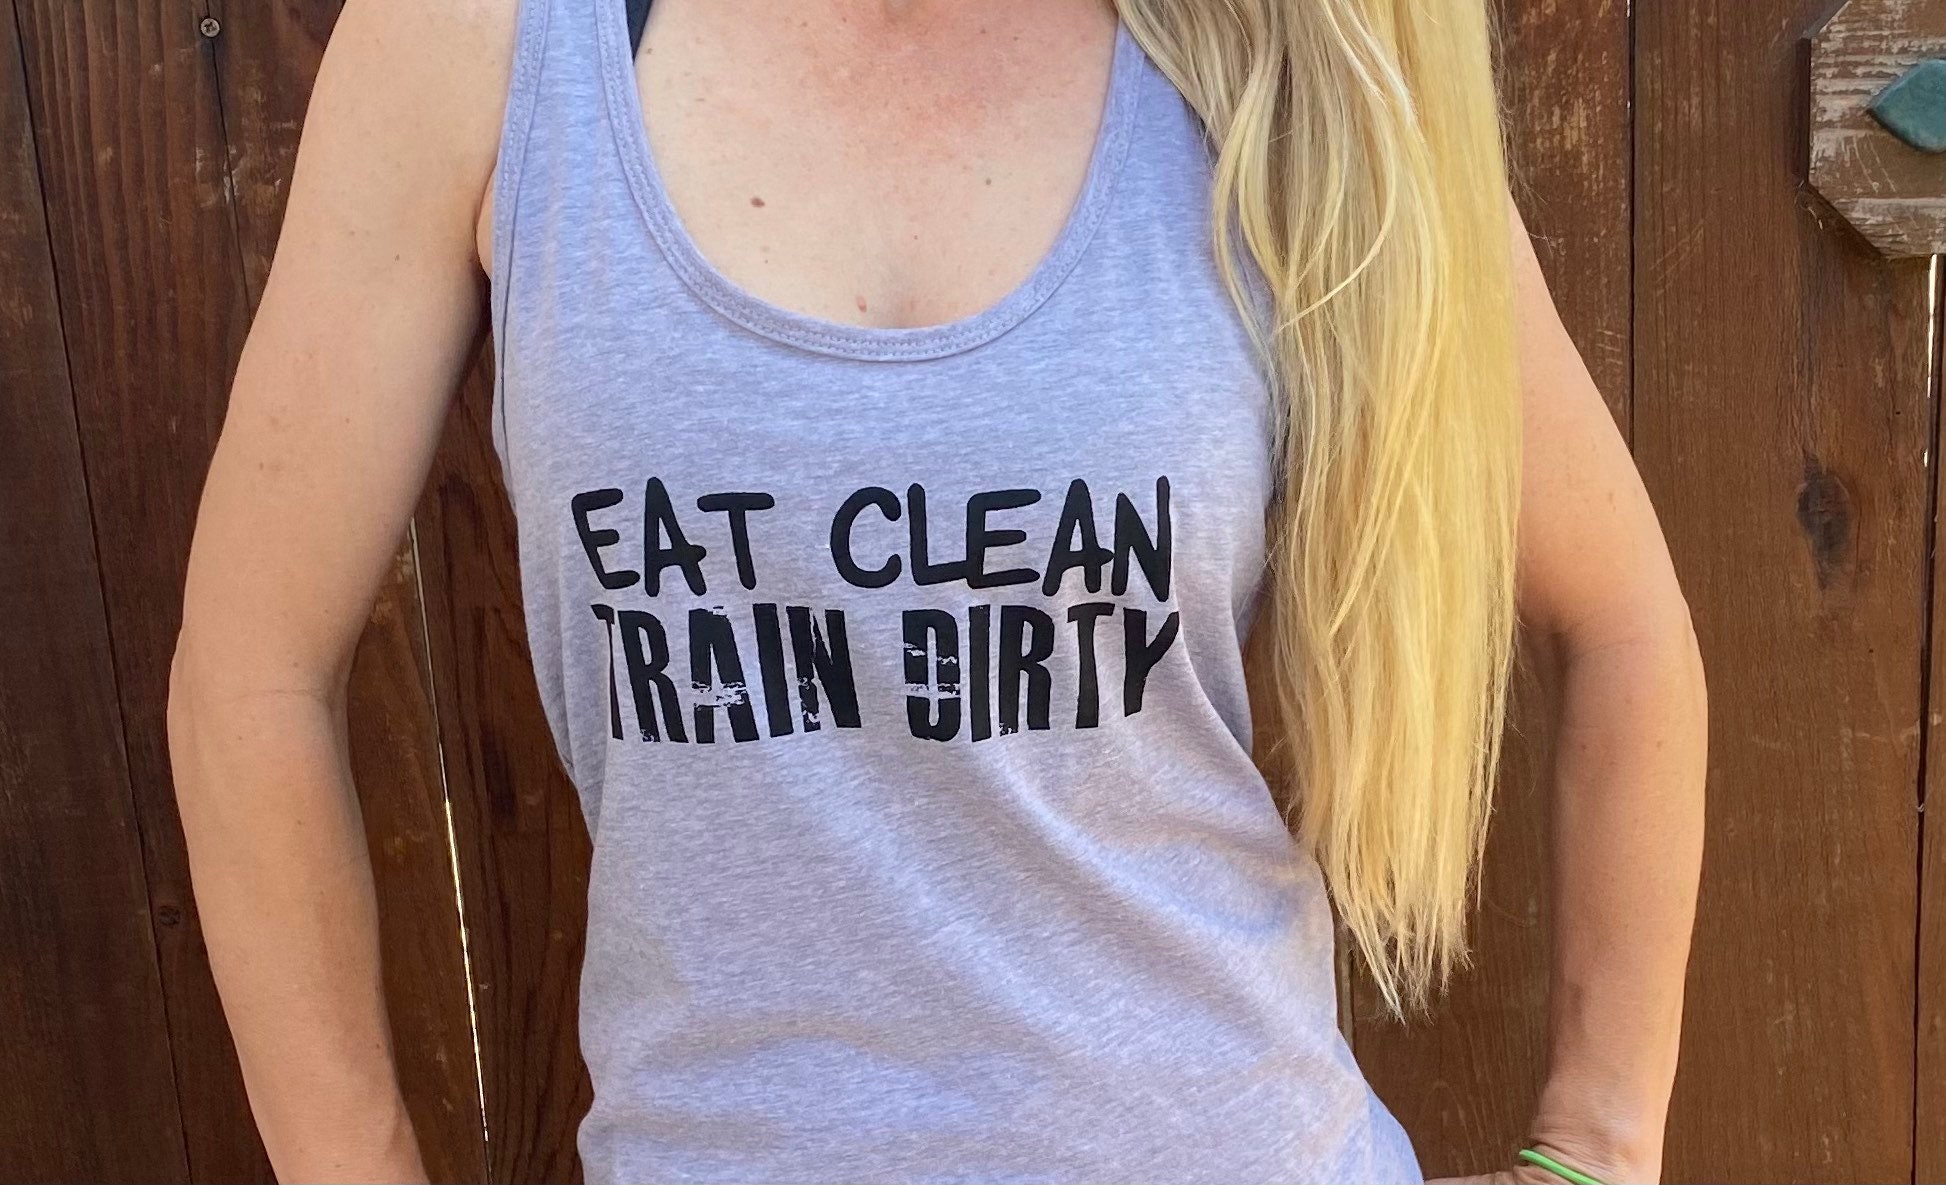 Eat Clean Train Dirty Mens Workout Gym Funny Fitness Health Nut Gifts Tank  Tops